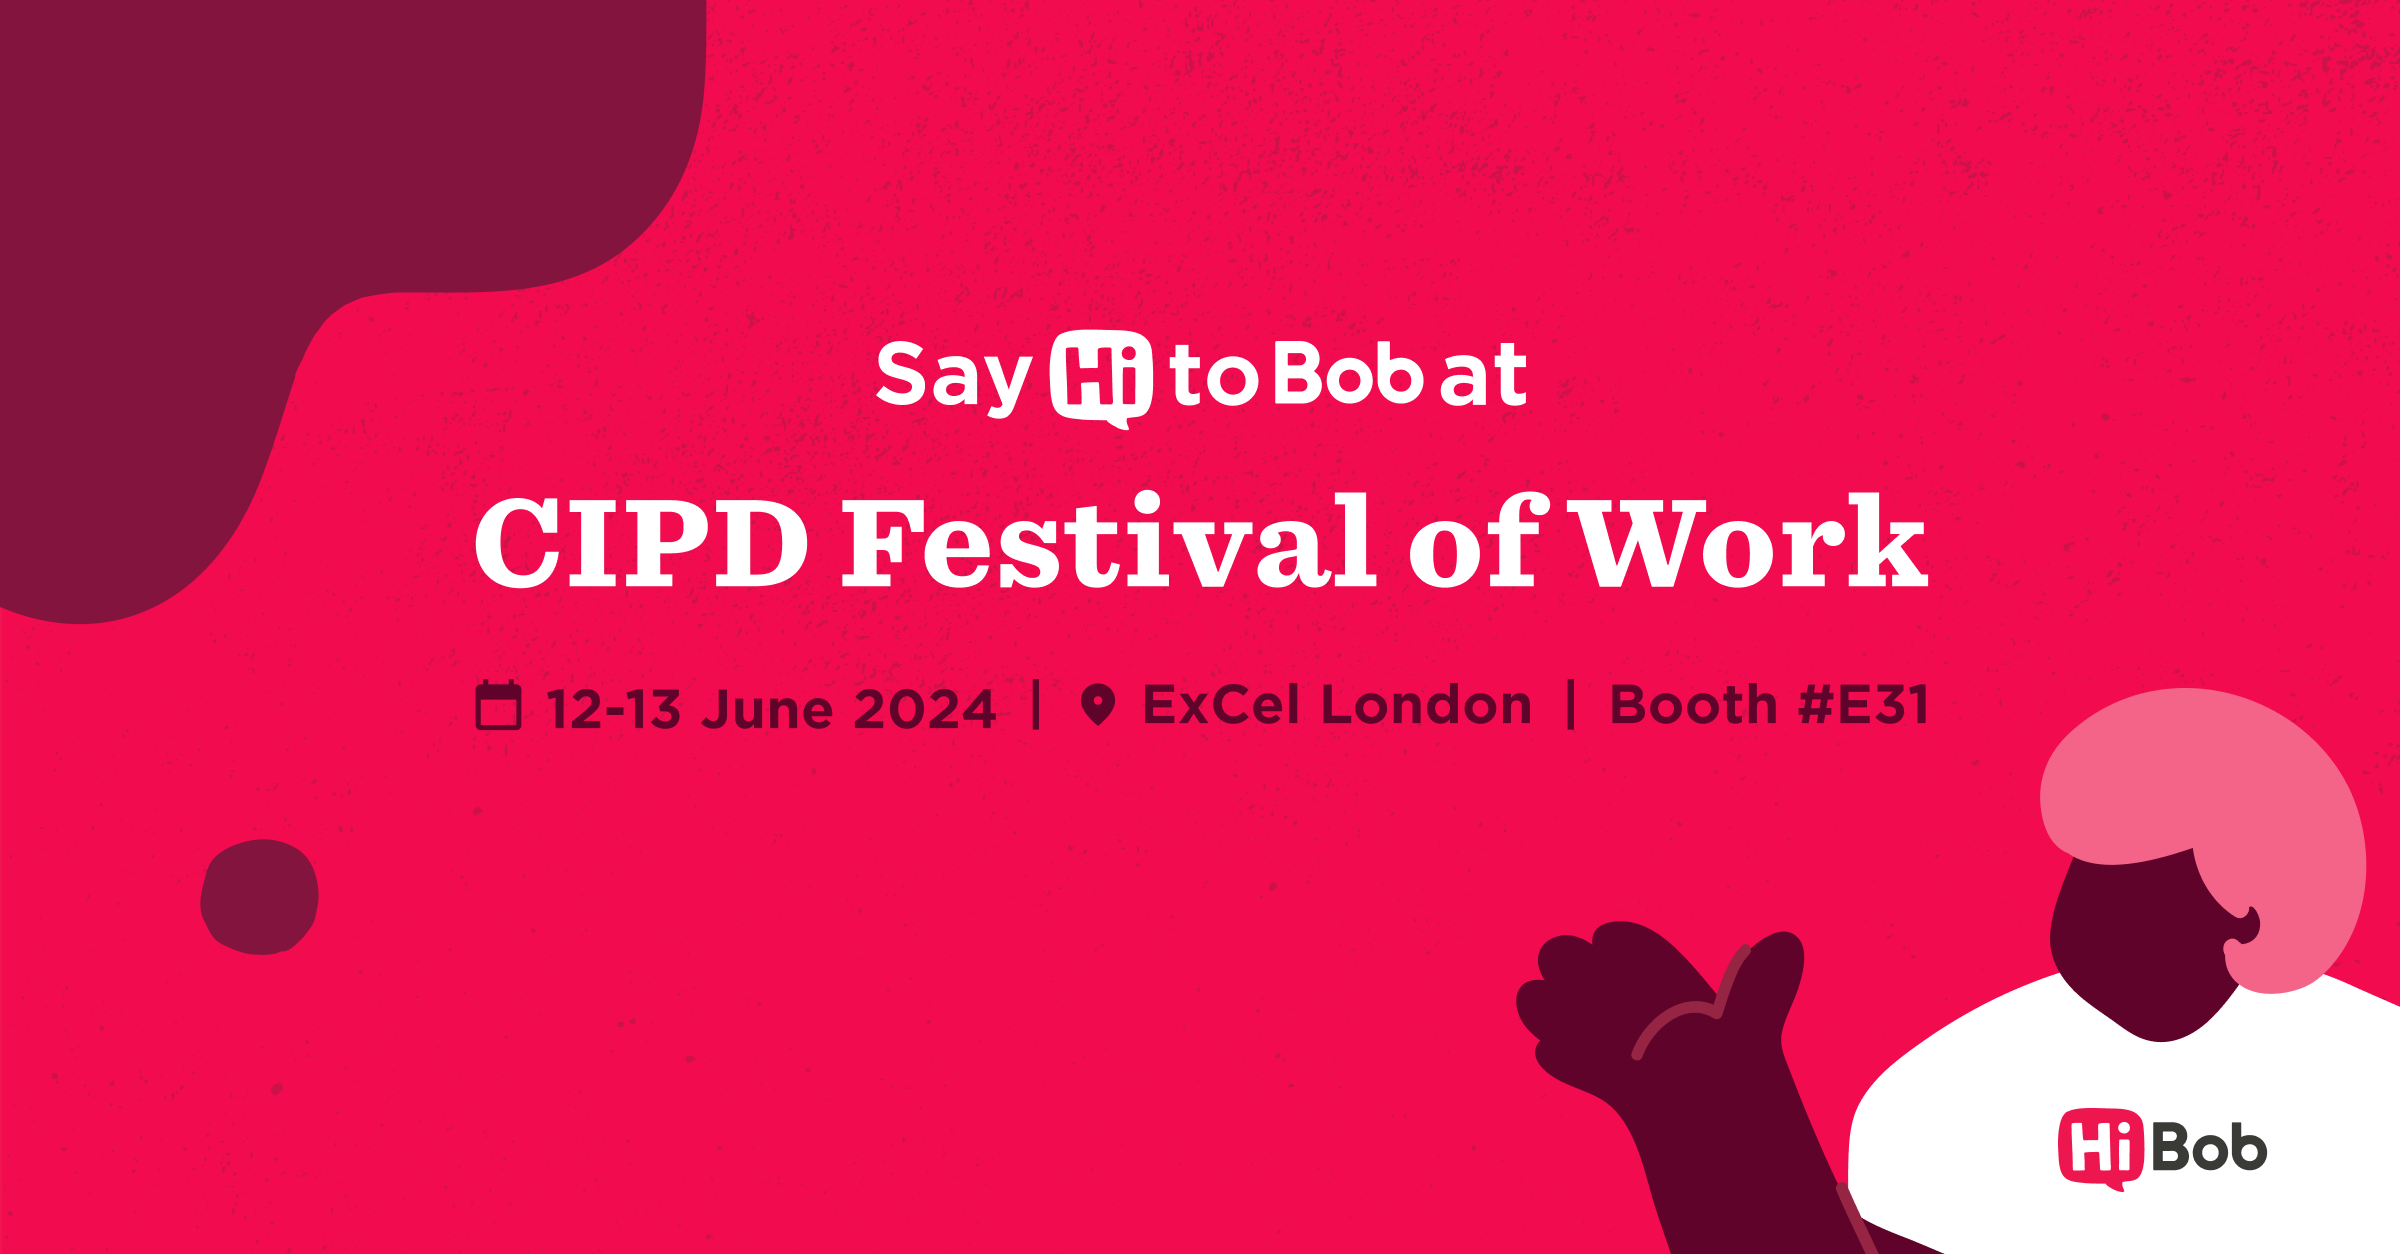 Say Hi to Bob at CIPD Festival of Work - CIPDs-Festival-of-Work_Sharing-banner.png